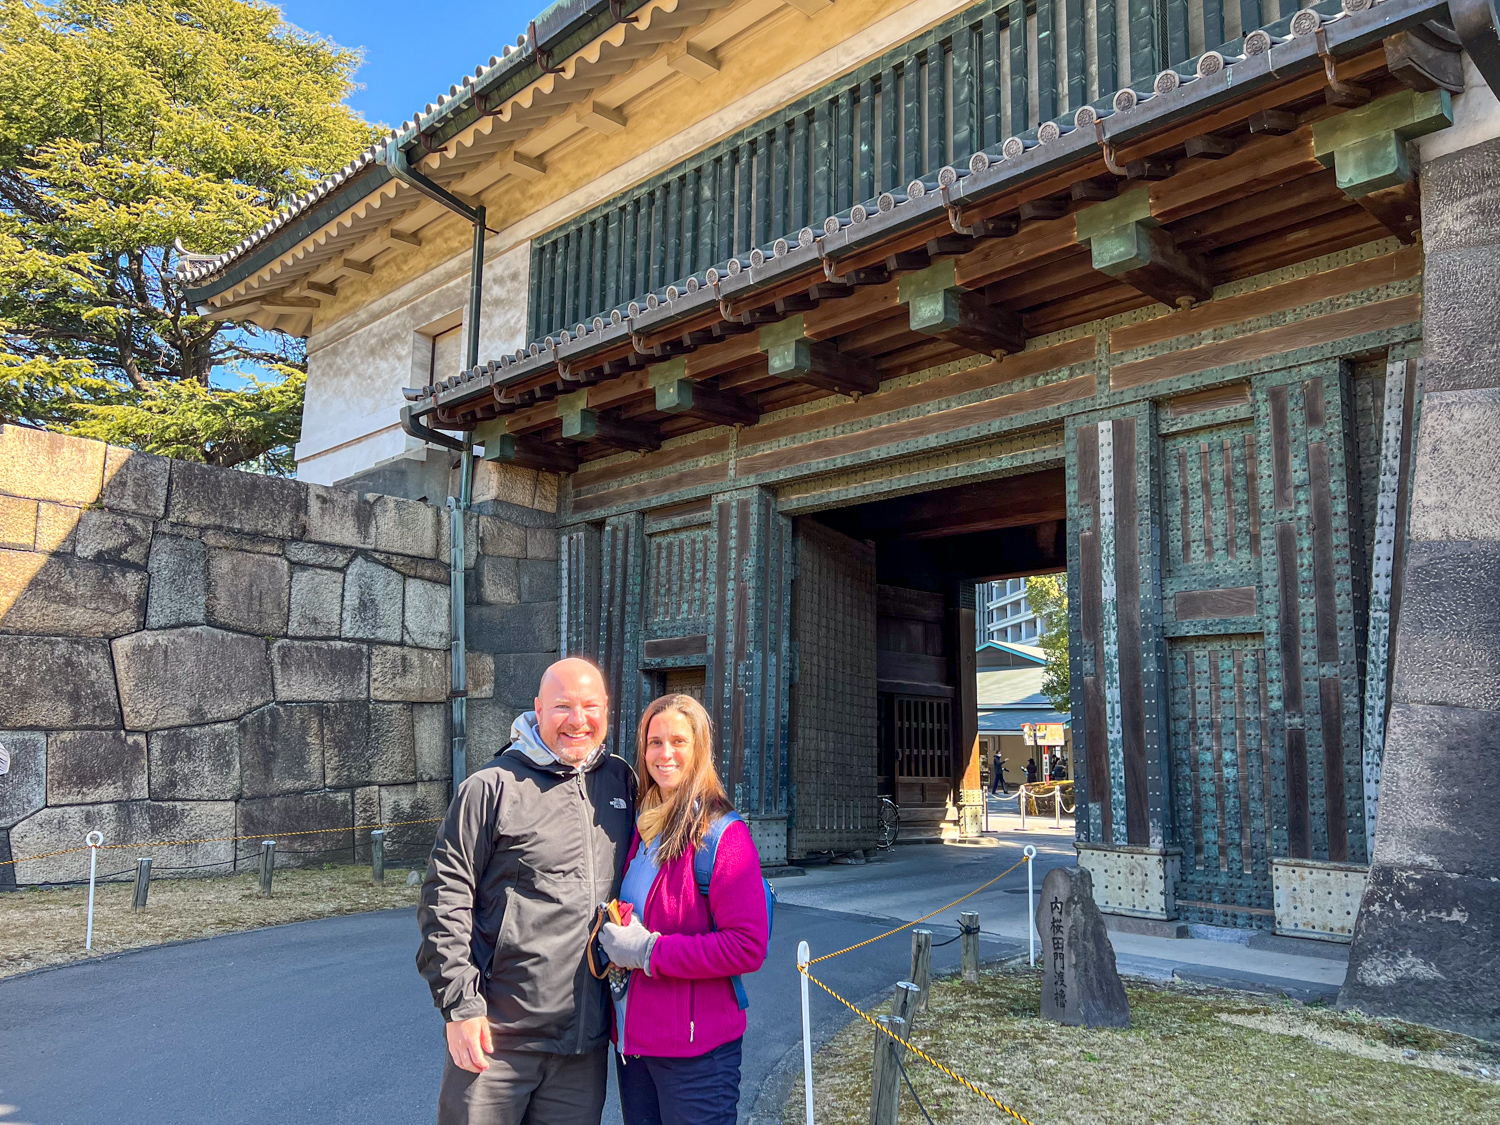 Dave and Kel at the Imperial Palace in Tokyo